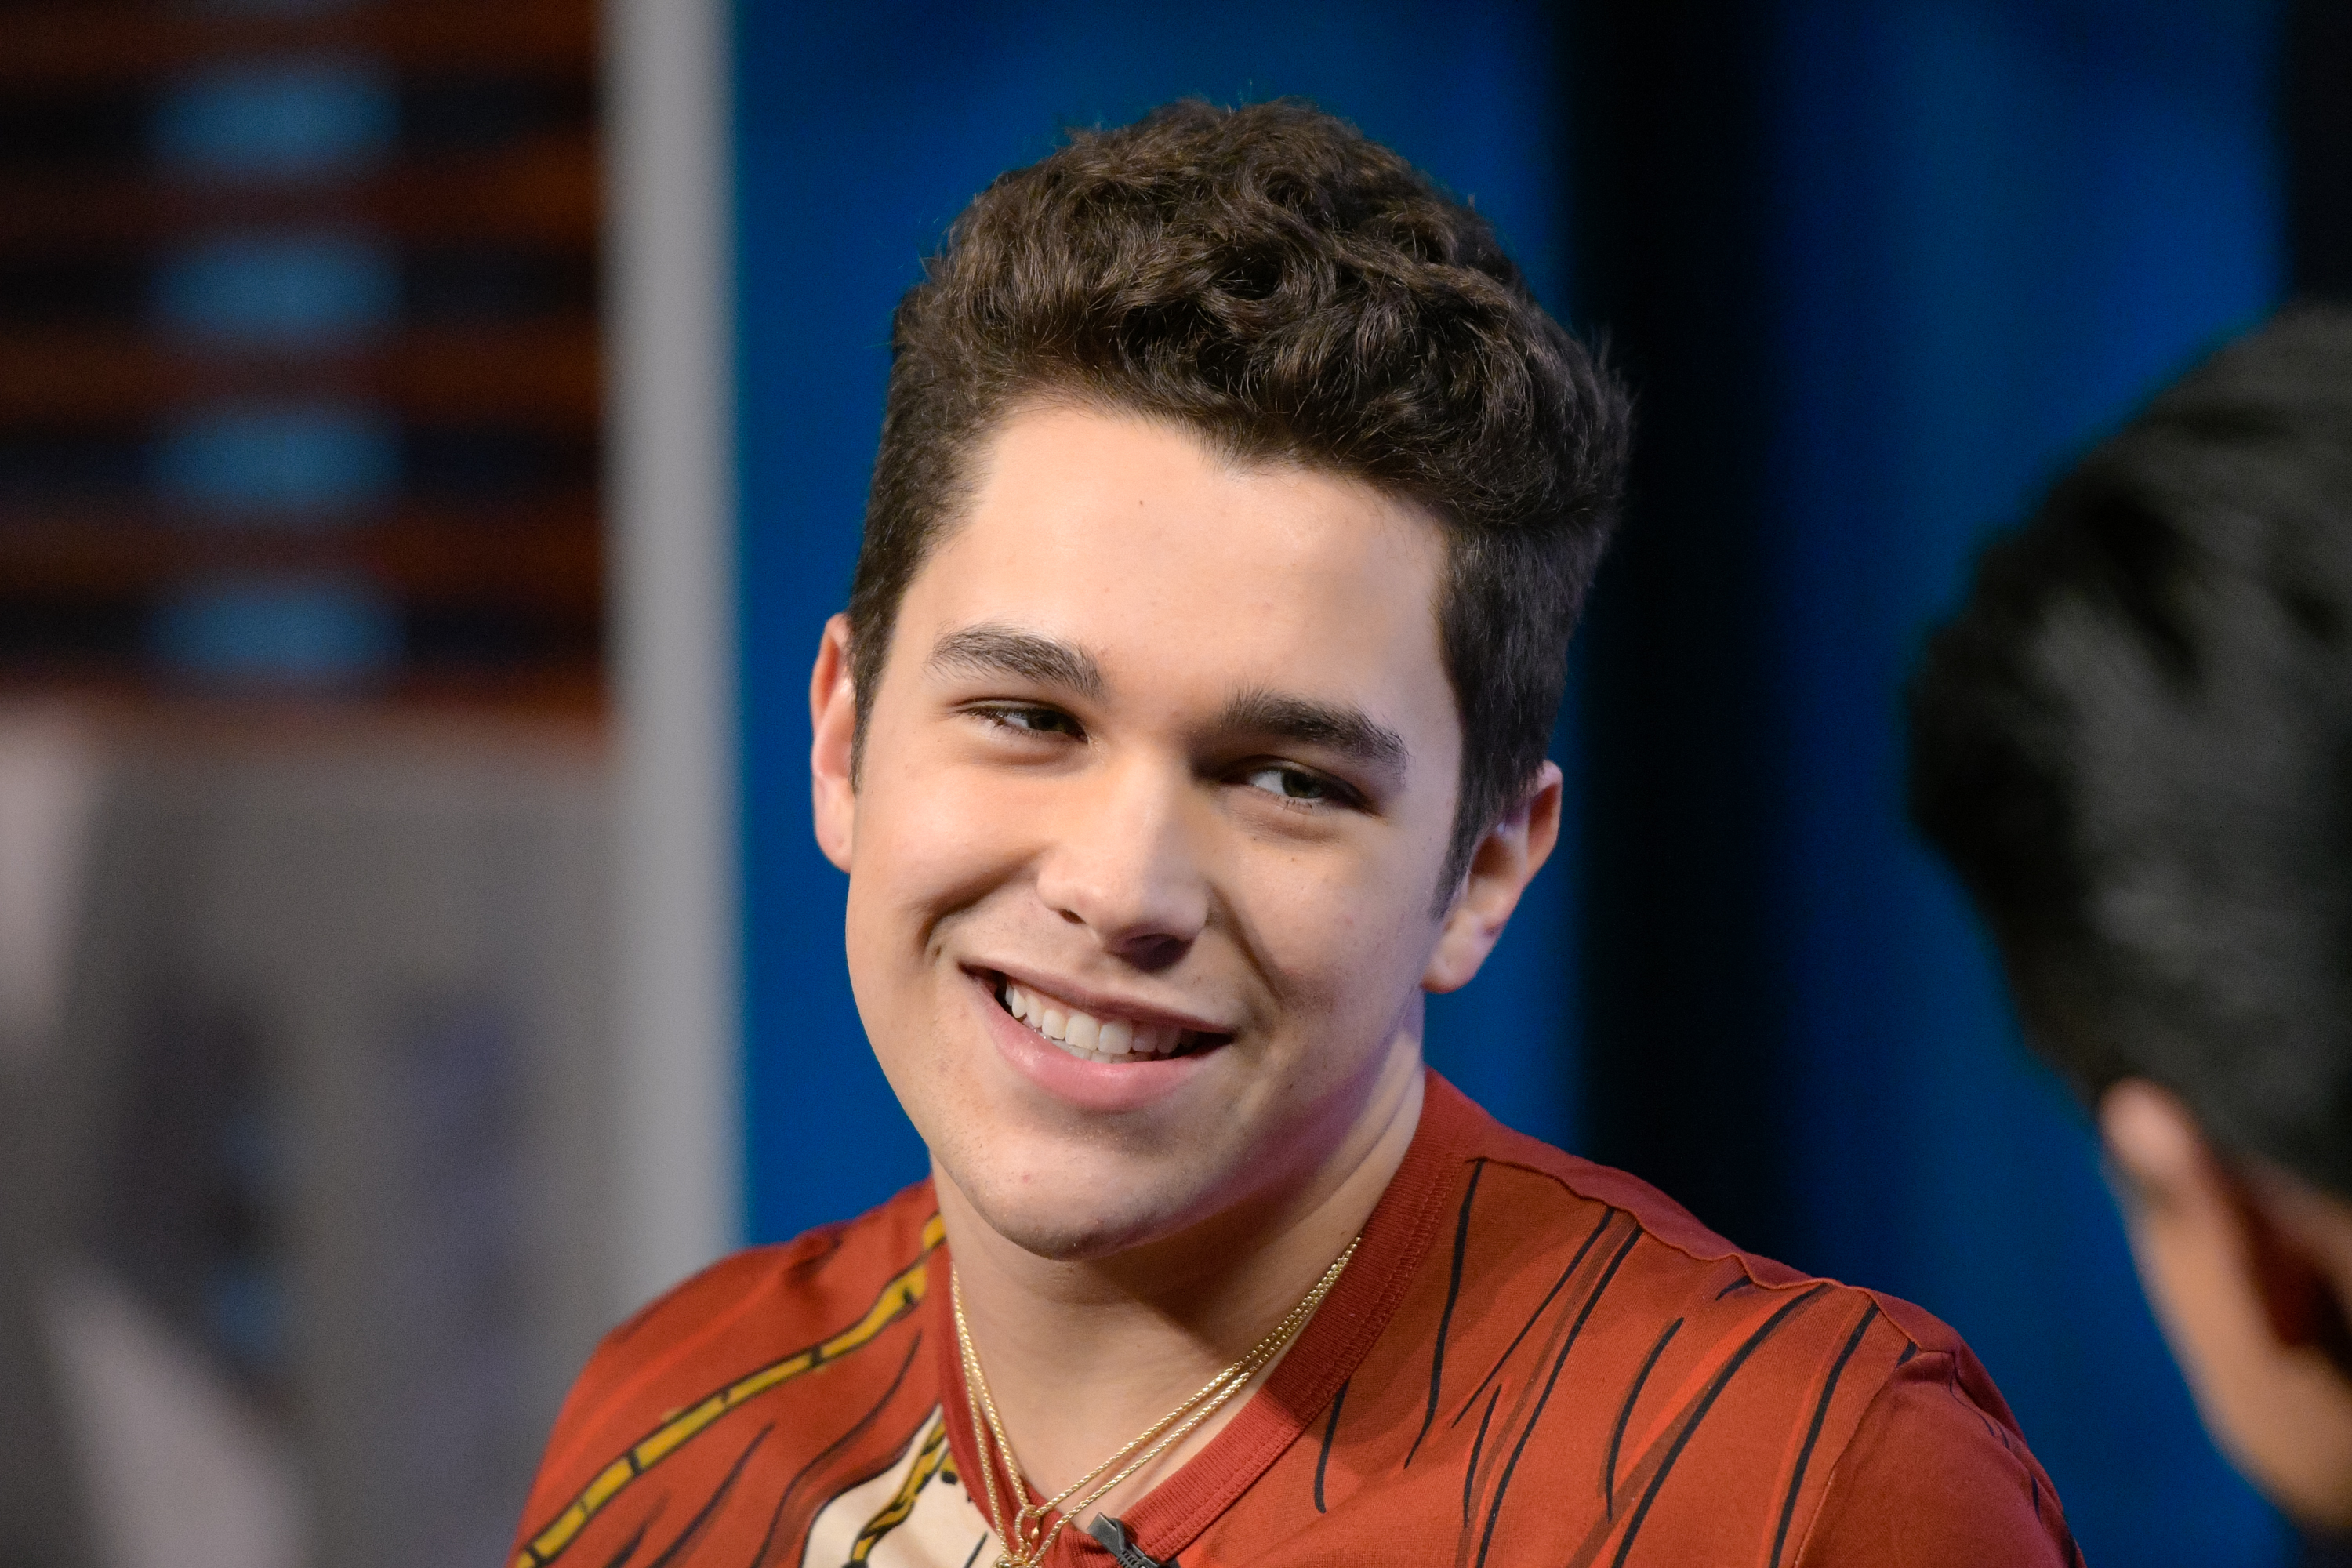 Is austin mahone dating someone new after his split from becky g? 